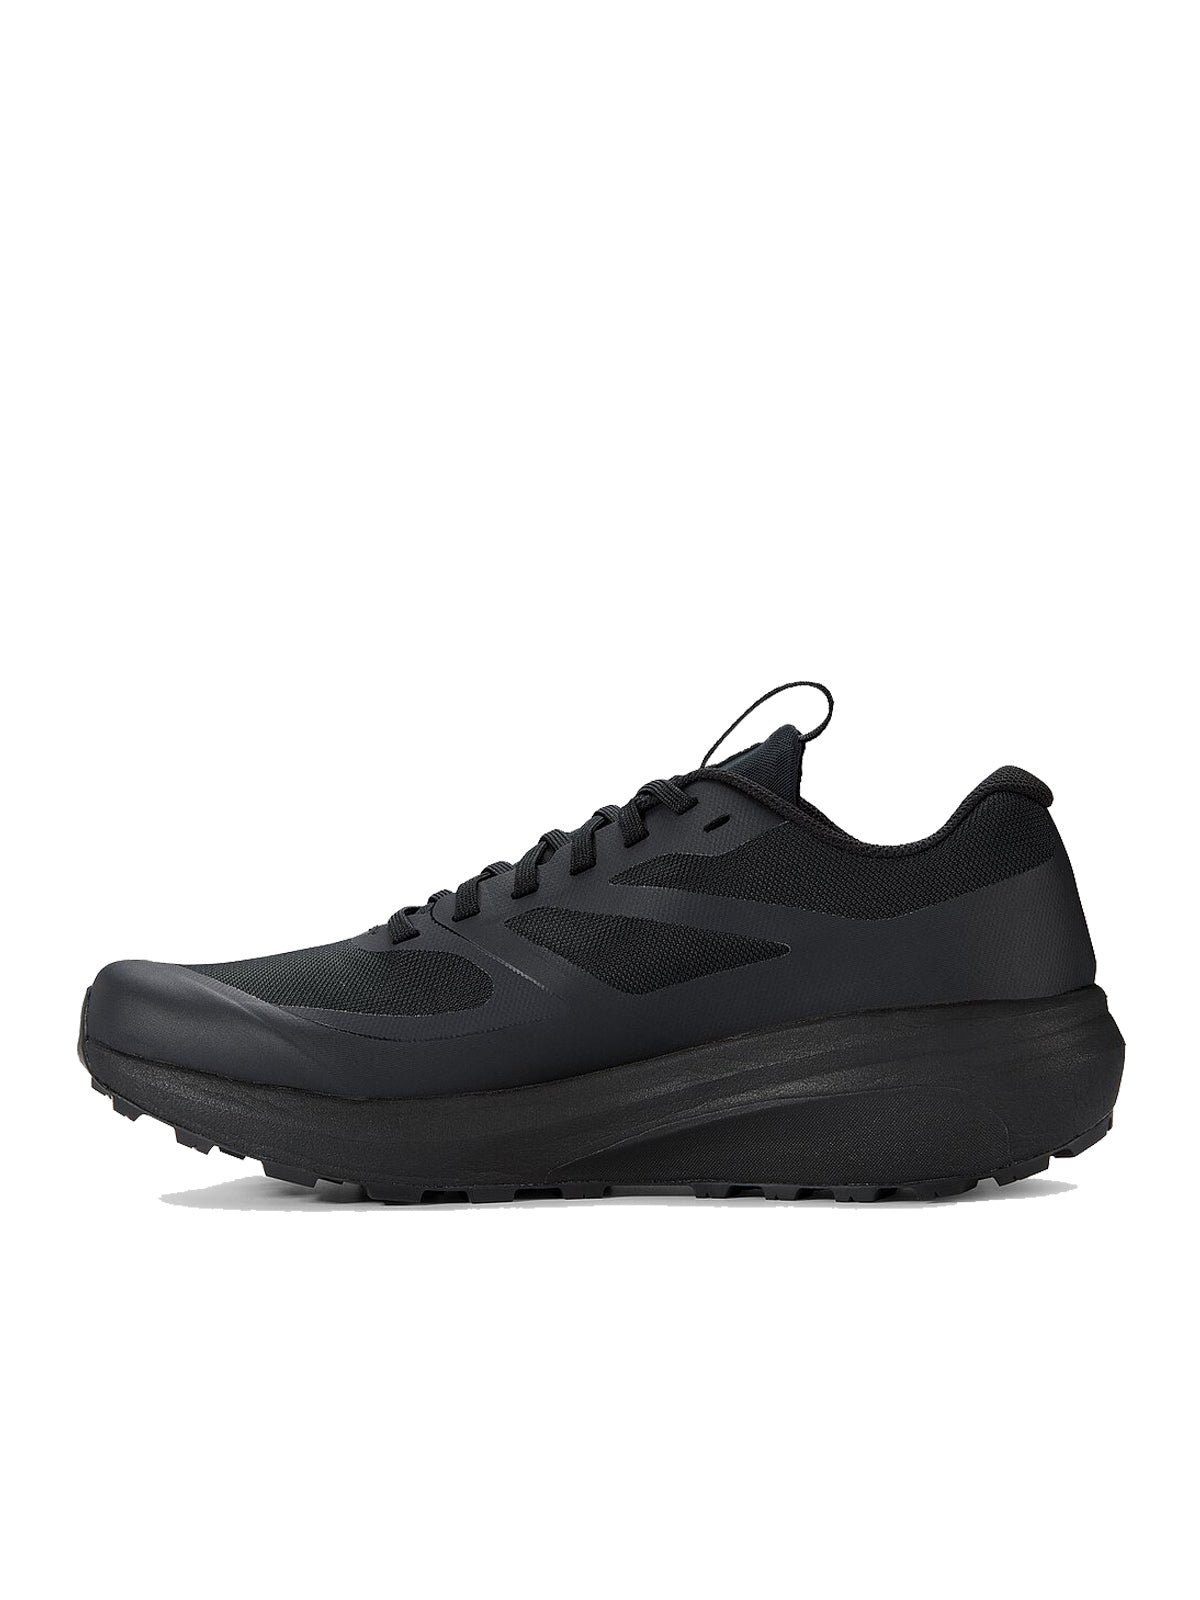 Chaussure Norvan Ld 3 Homme